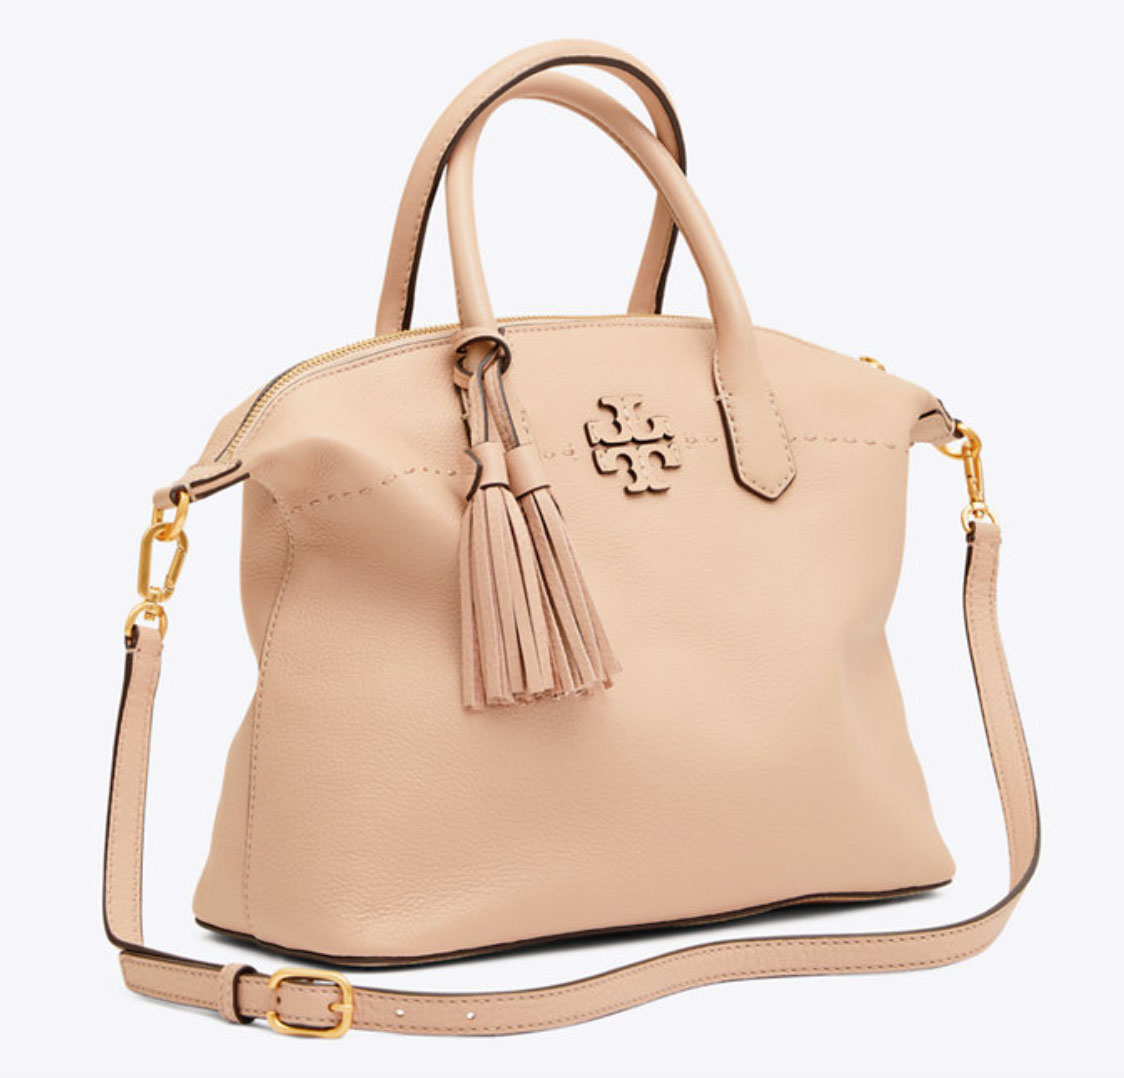 McGraw Slouchy Satchel from Tory Burch